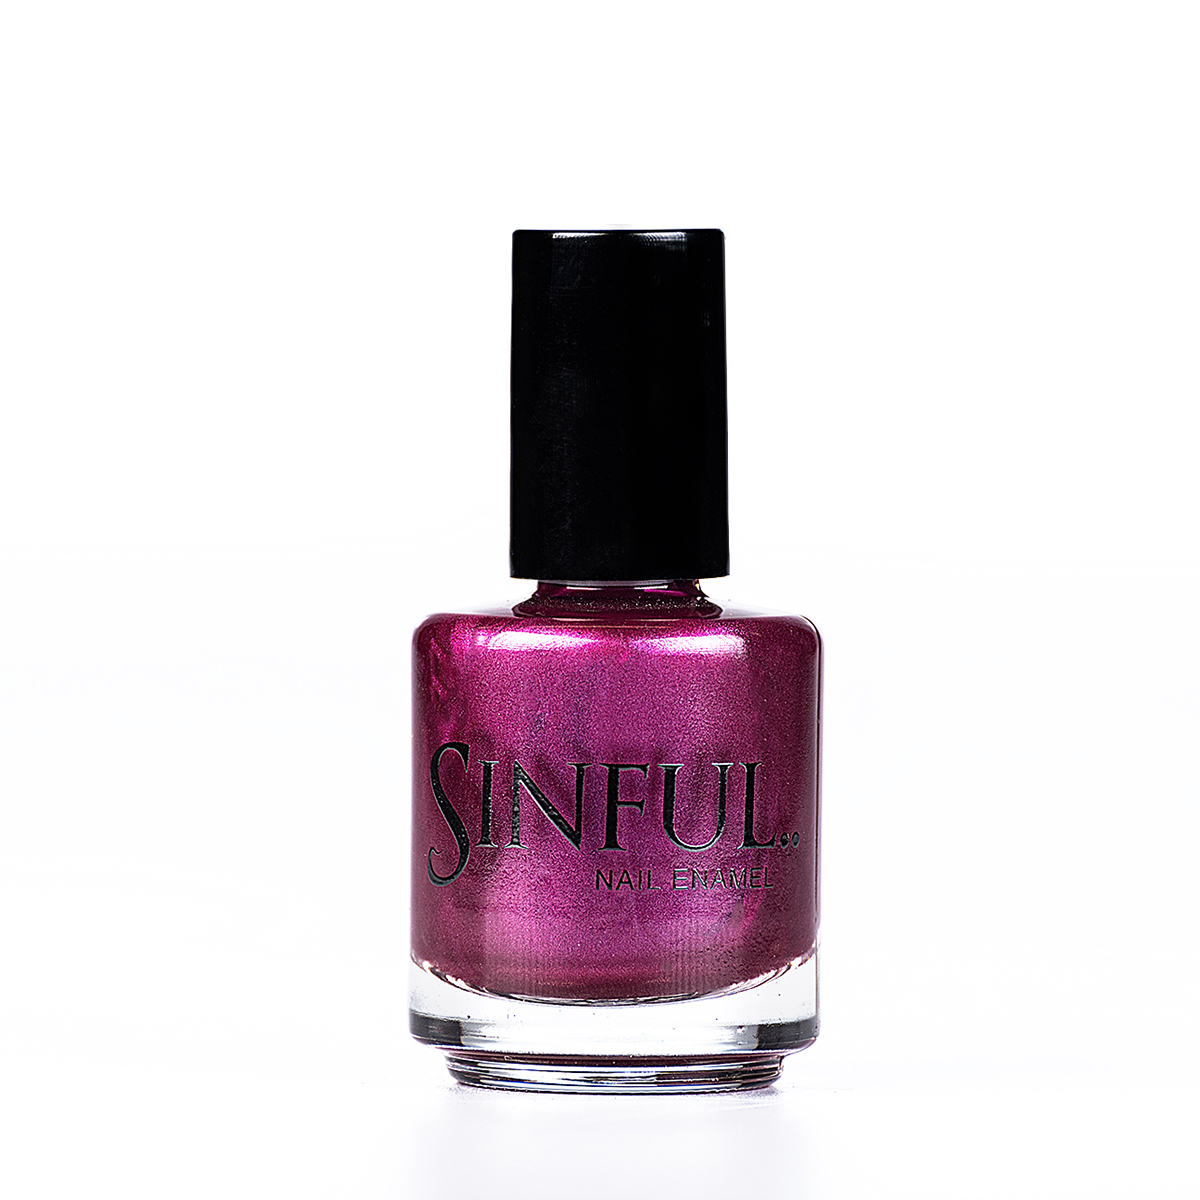 Let us tell you a little secret, a glossy warm purple - don't let this one go Sinful always recommends applying two coats of polish to give a solid colour, then applying top coat to extend the wear-time of the polish. 15ml